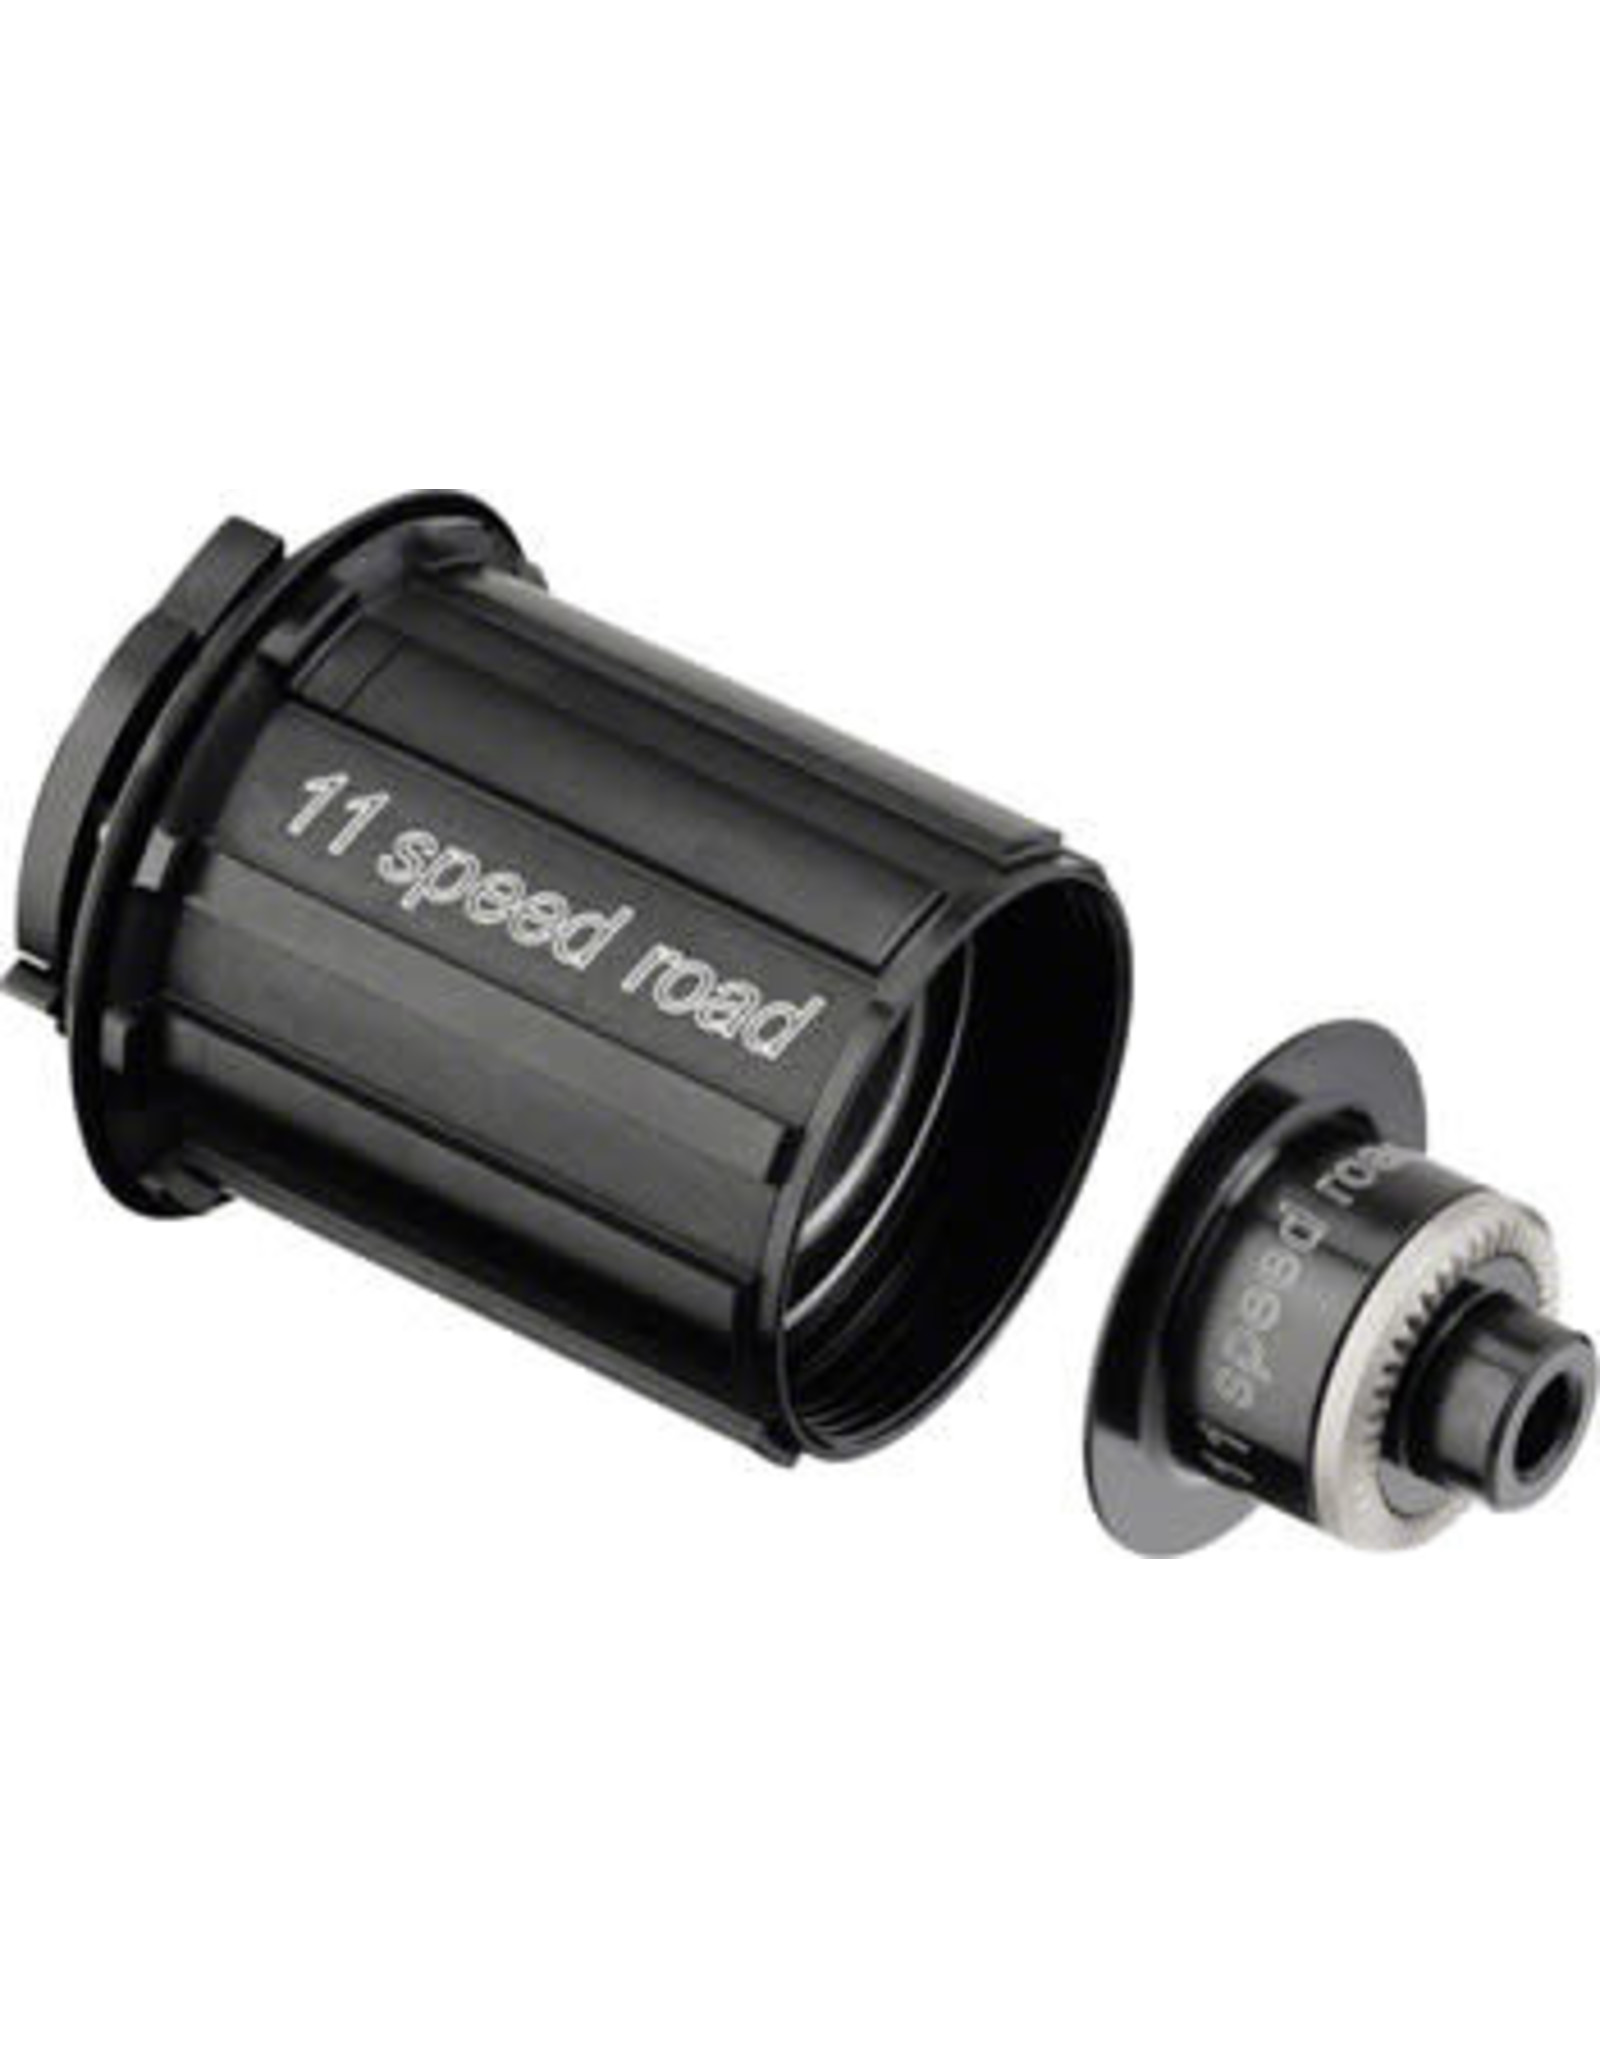 DT Swiss DT Swiss Aluminum 11-speed Road Freehub Body Kit for 3-pawl Hubs: Includes FH Body, QR End Cap and Pawls 